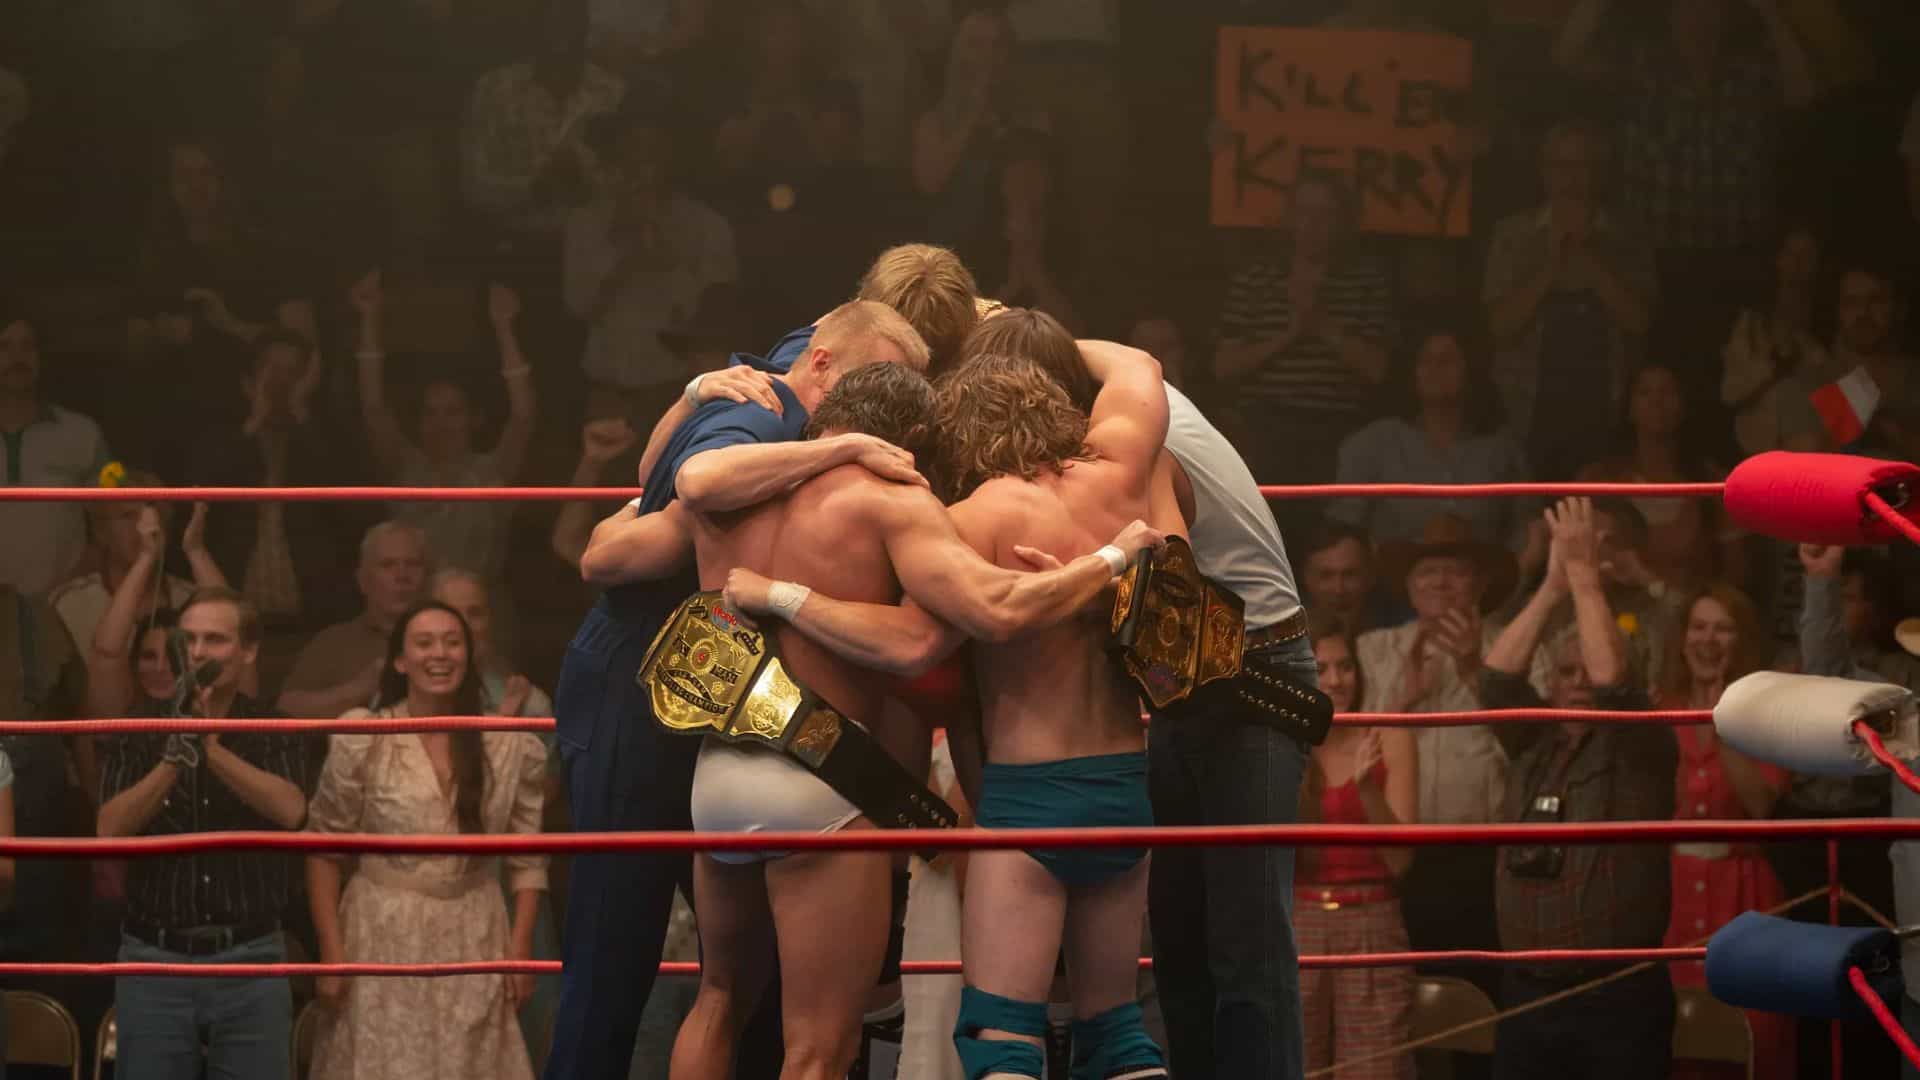 A family huddles together inside a wrestling ring in this image from A24.